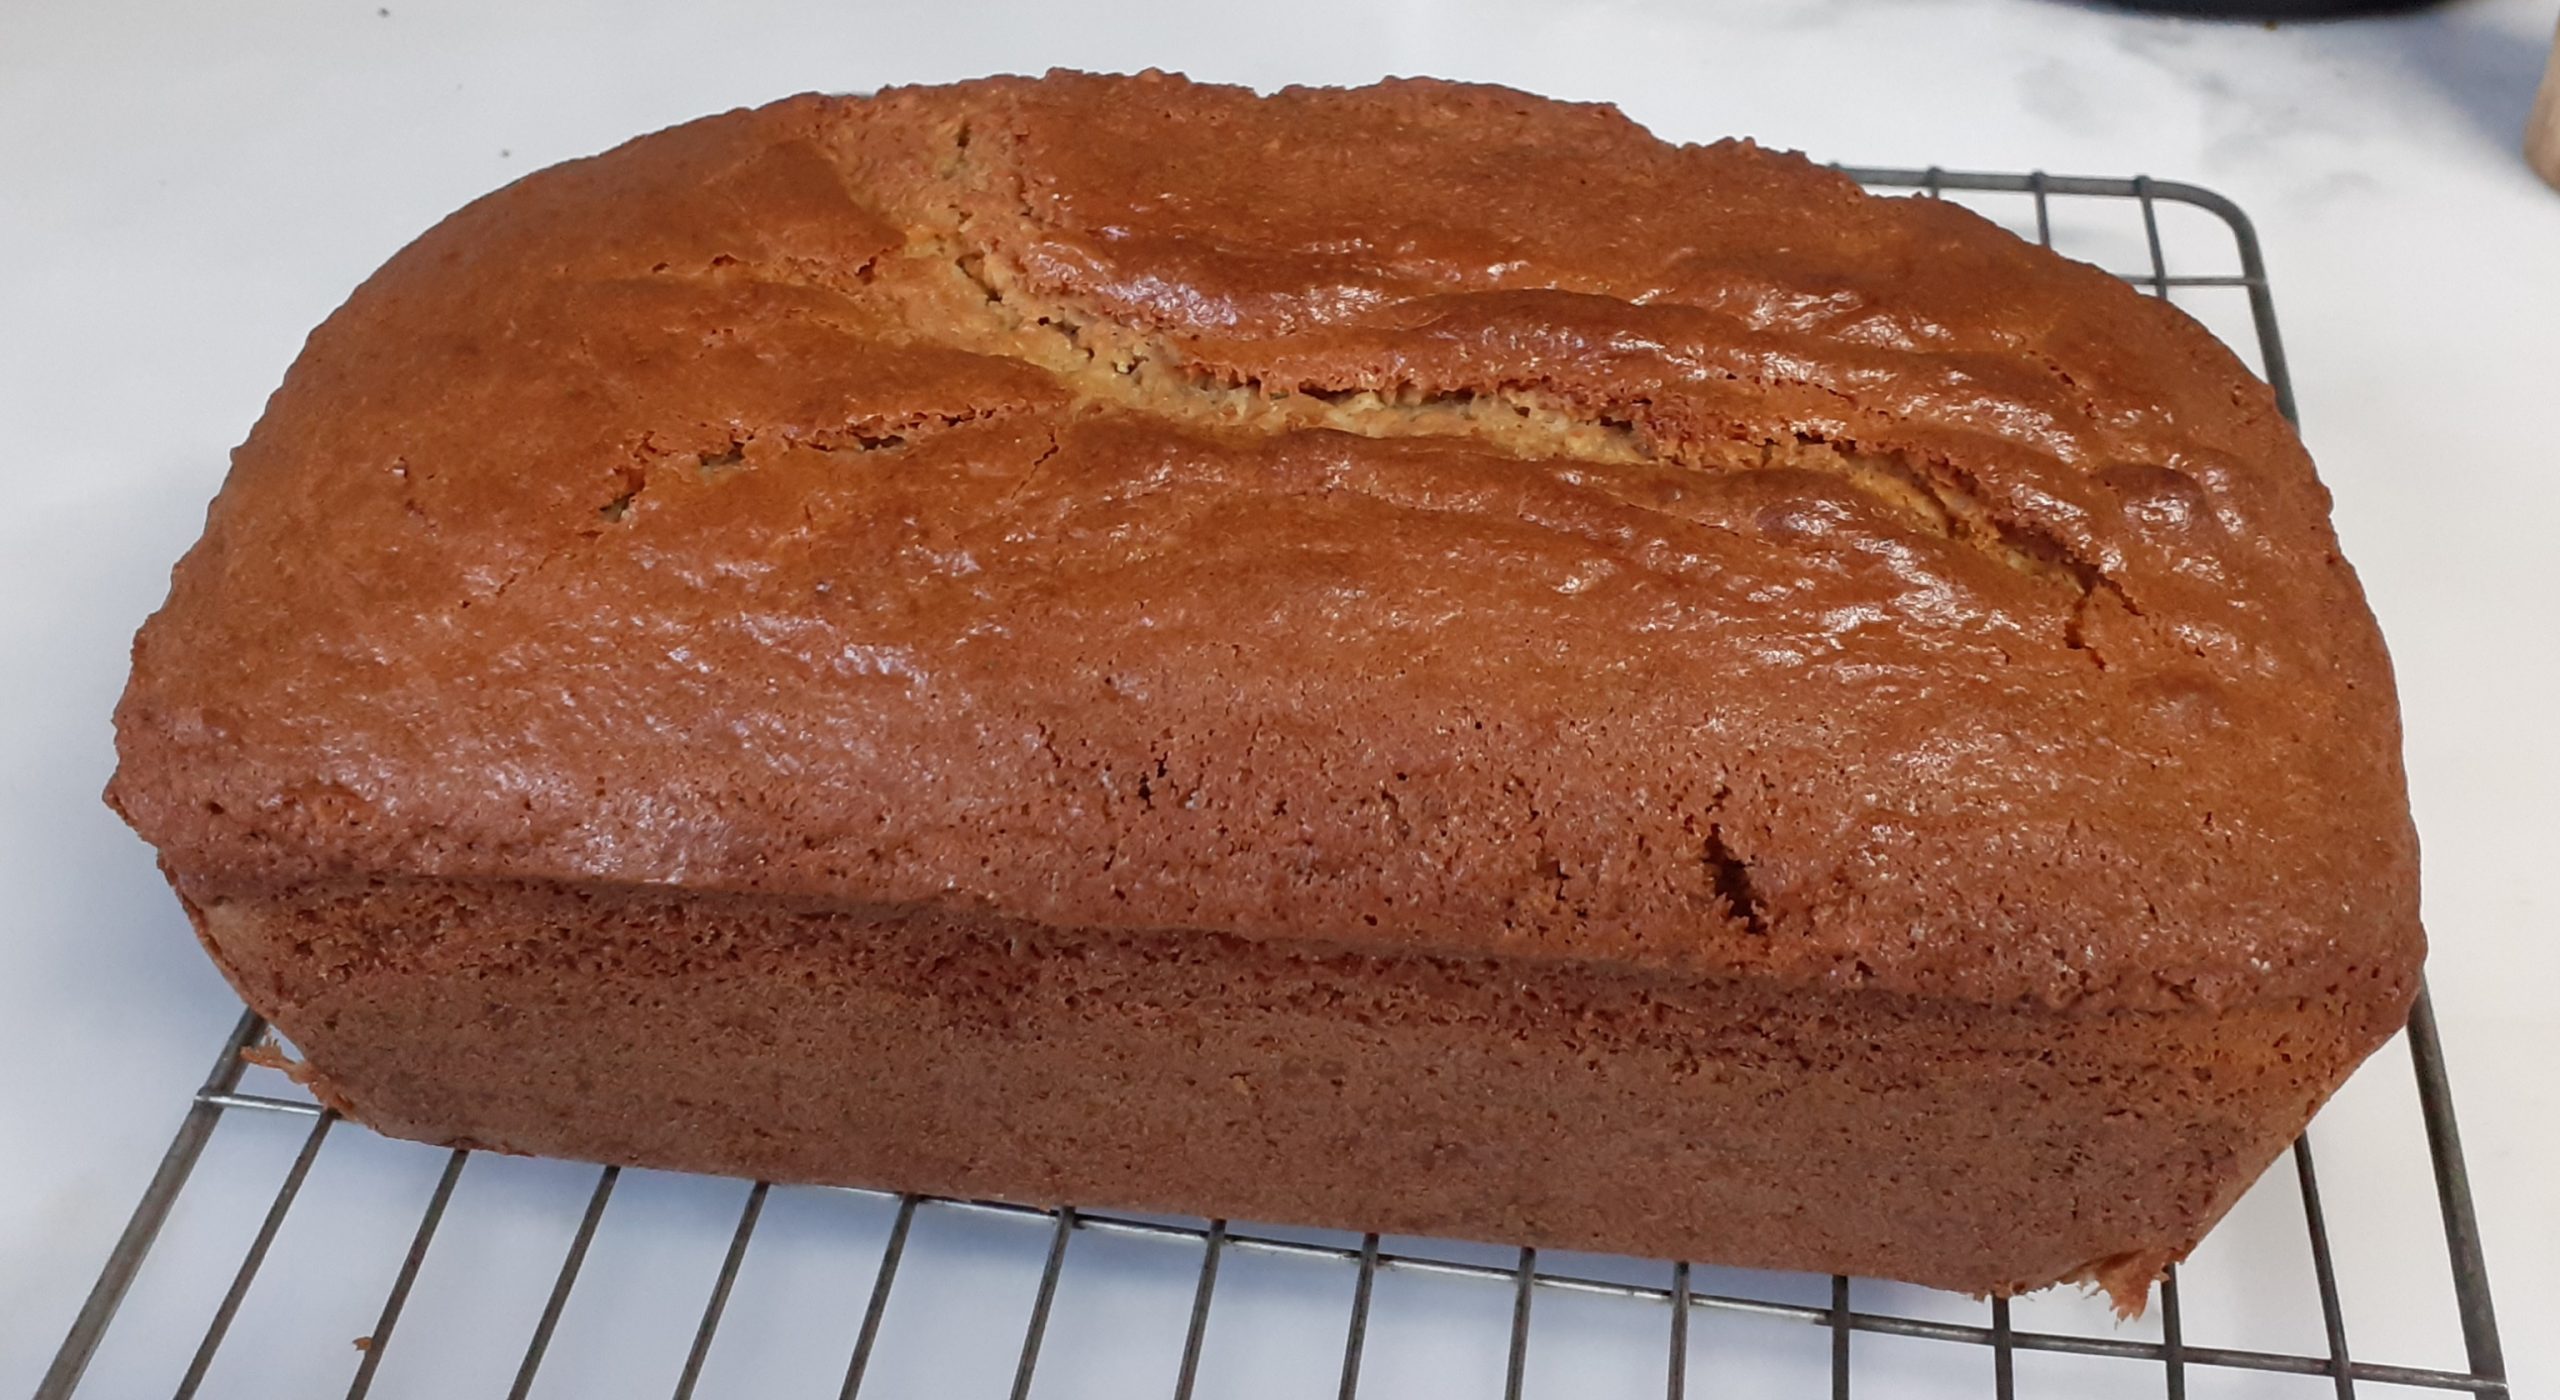 Golden brown loaf cake on wire cooling rack with white background